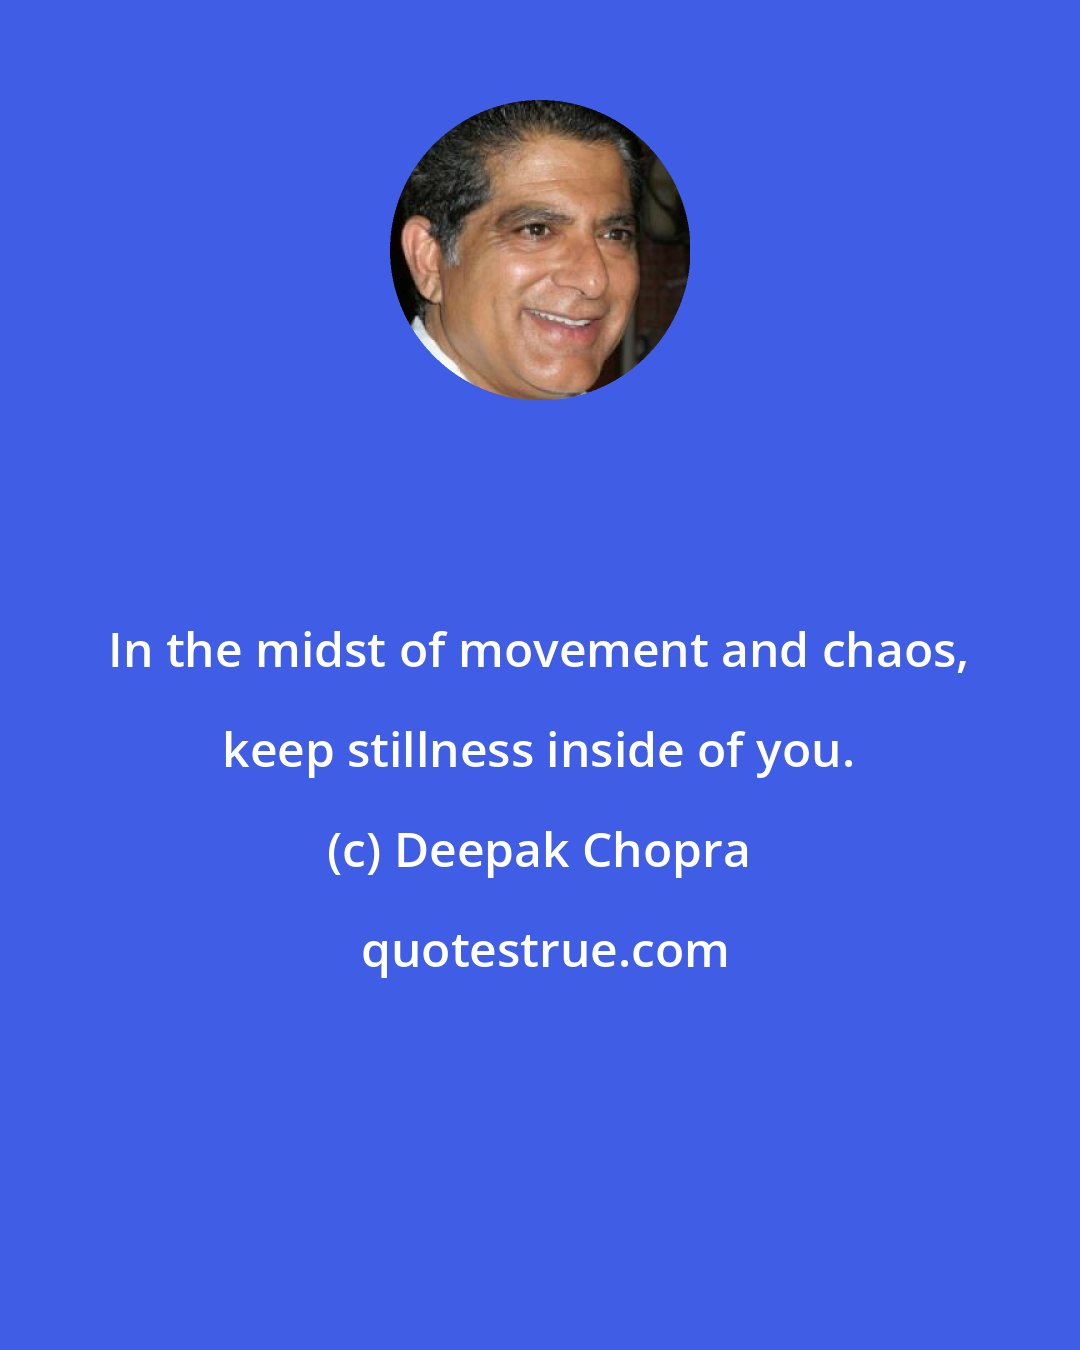 Deepak Chopra: In the midst of movement and chaos, keep stillness inside of you.